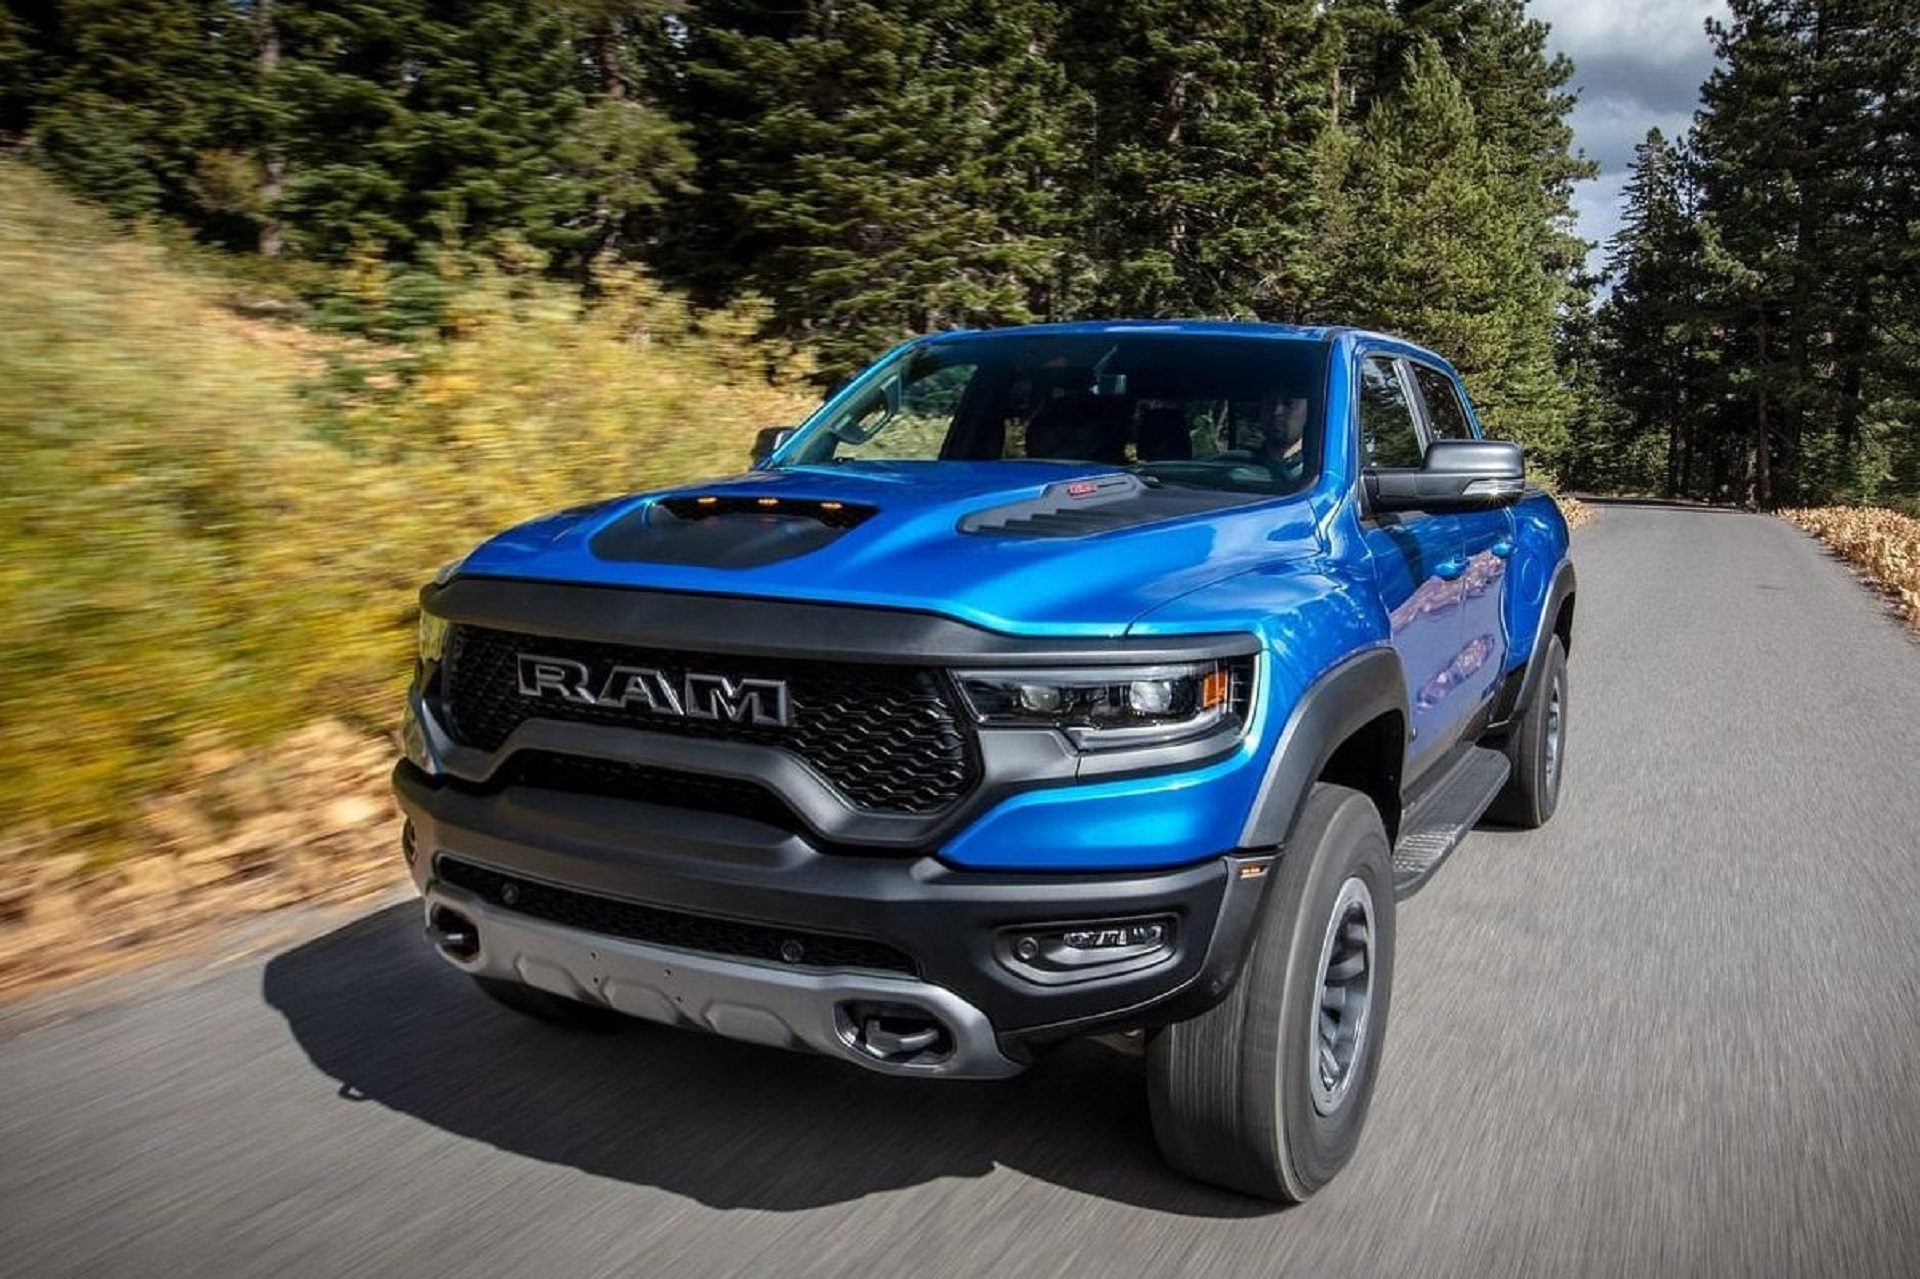 Front-angled view of a blue RAM 1500 TRX